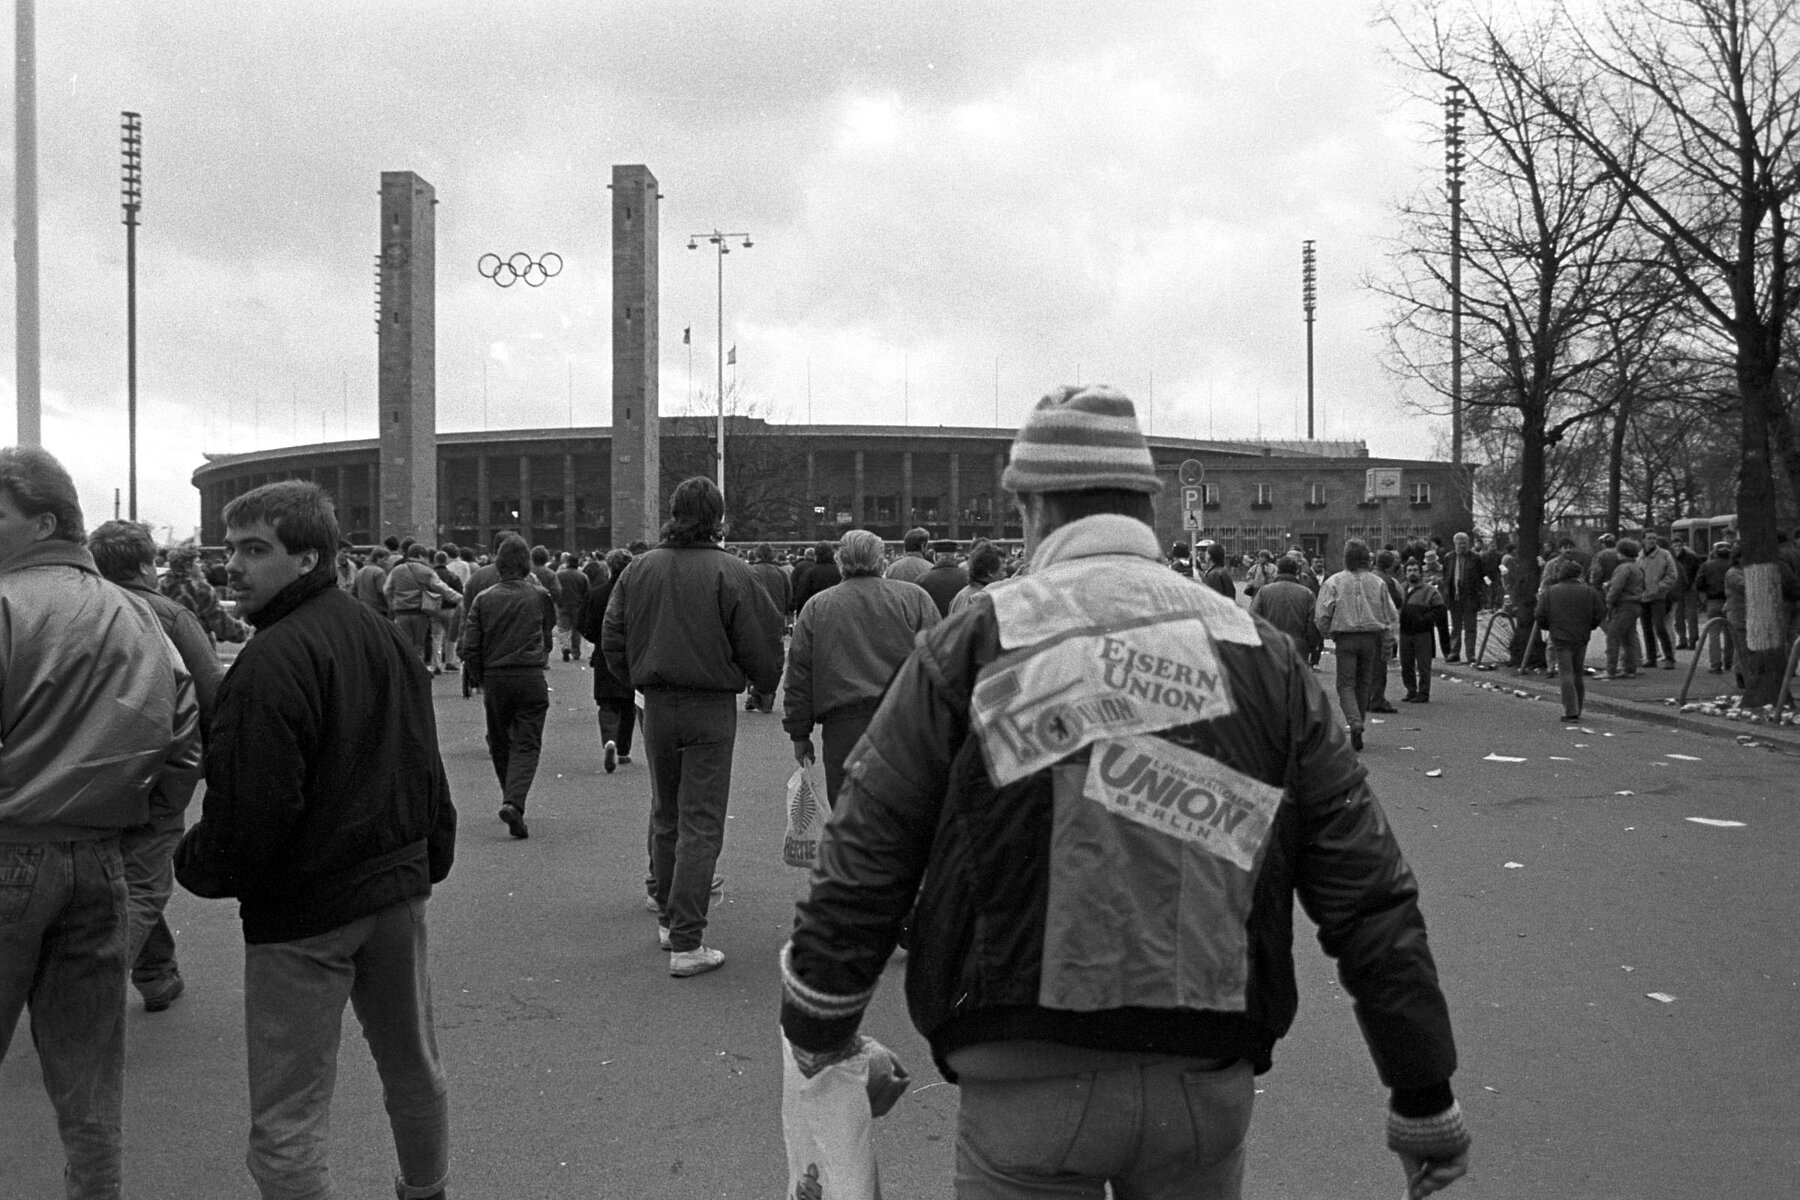 A Union fan with diverse patches on his jacket walks towards the Olympic Stadium.